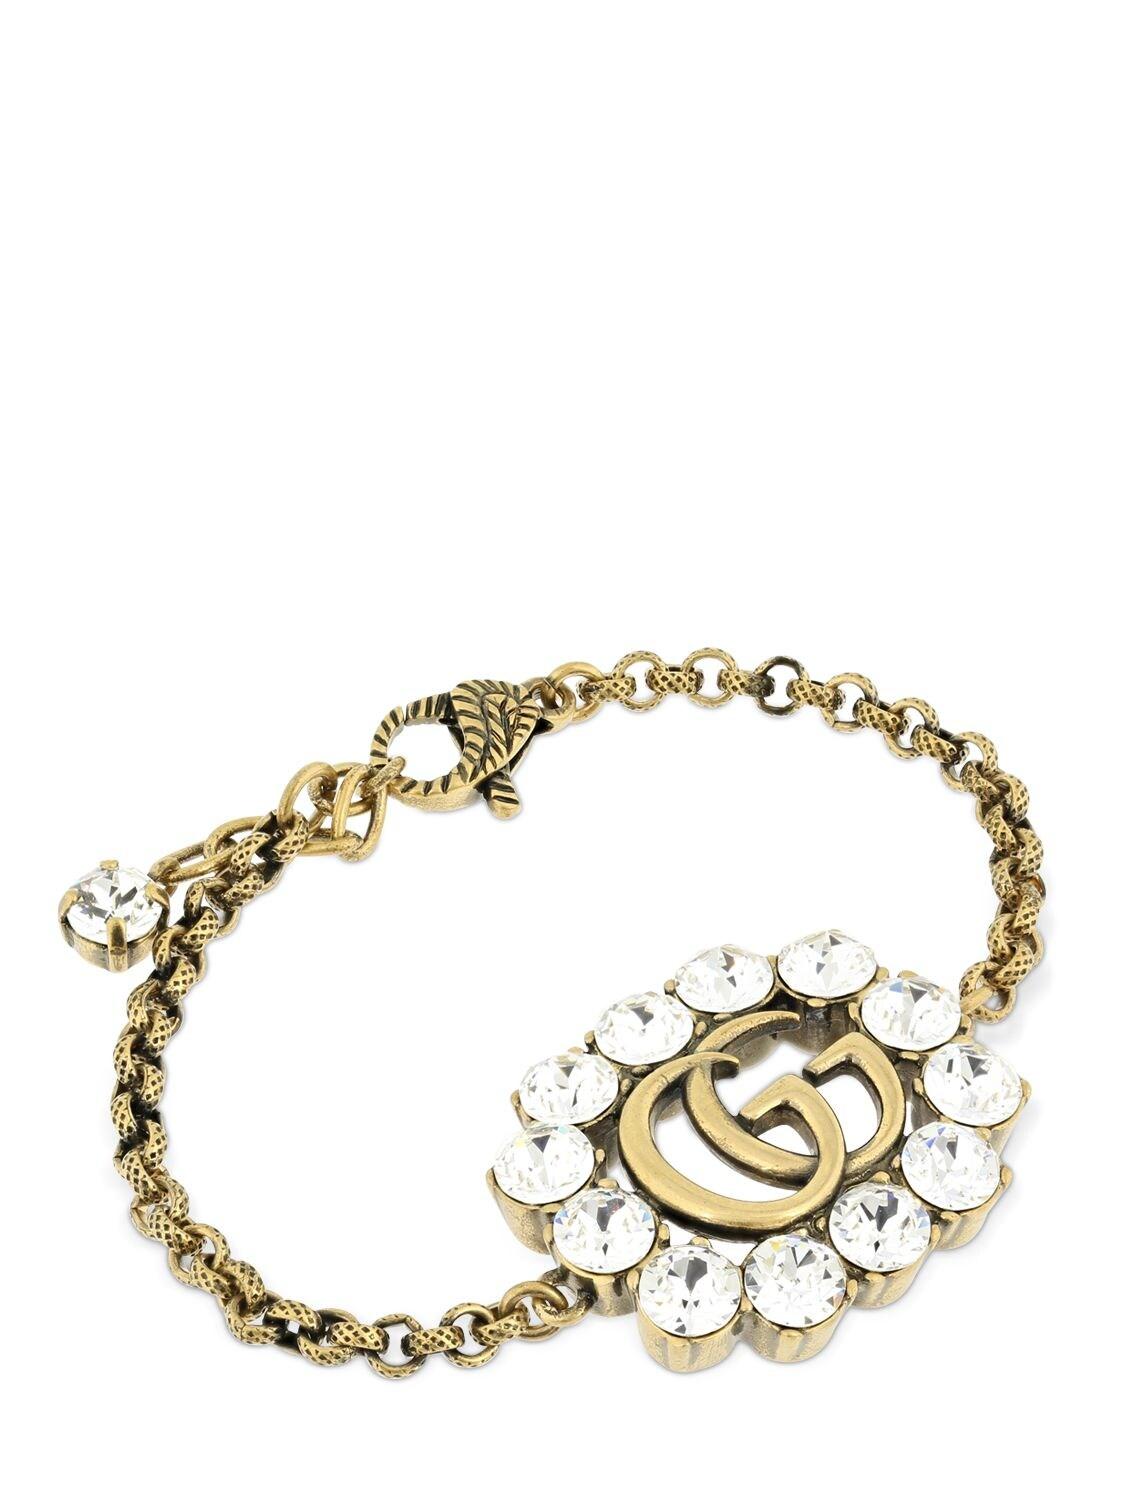 Gucci Gg Marmont Crystal Bracelet in Gold/Crystal (Metallic) - Lyst